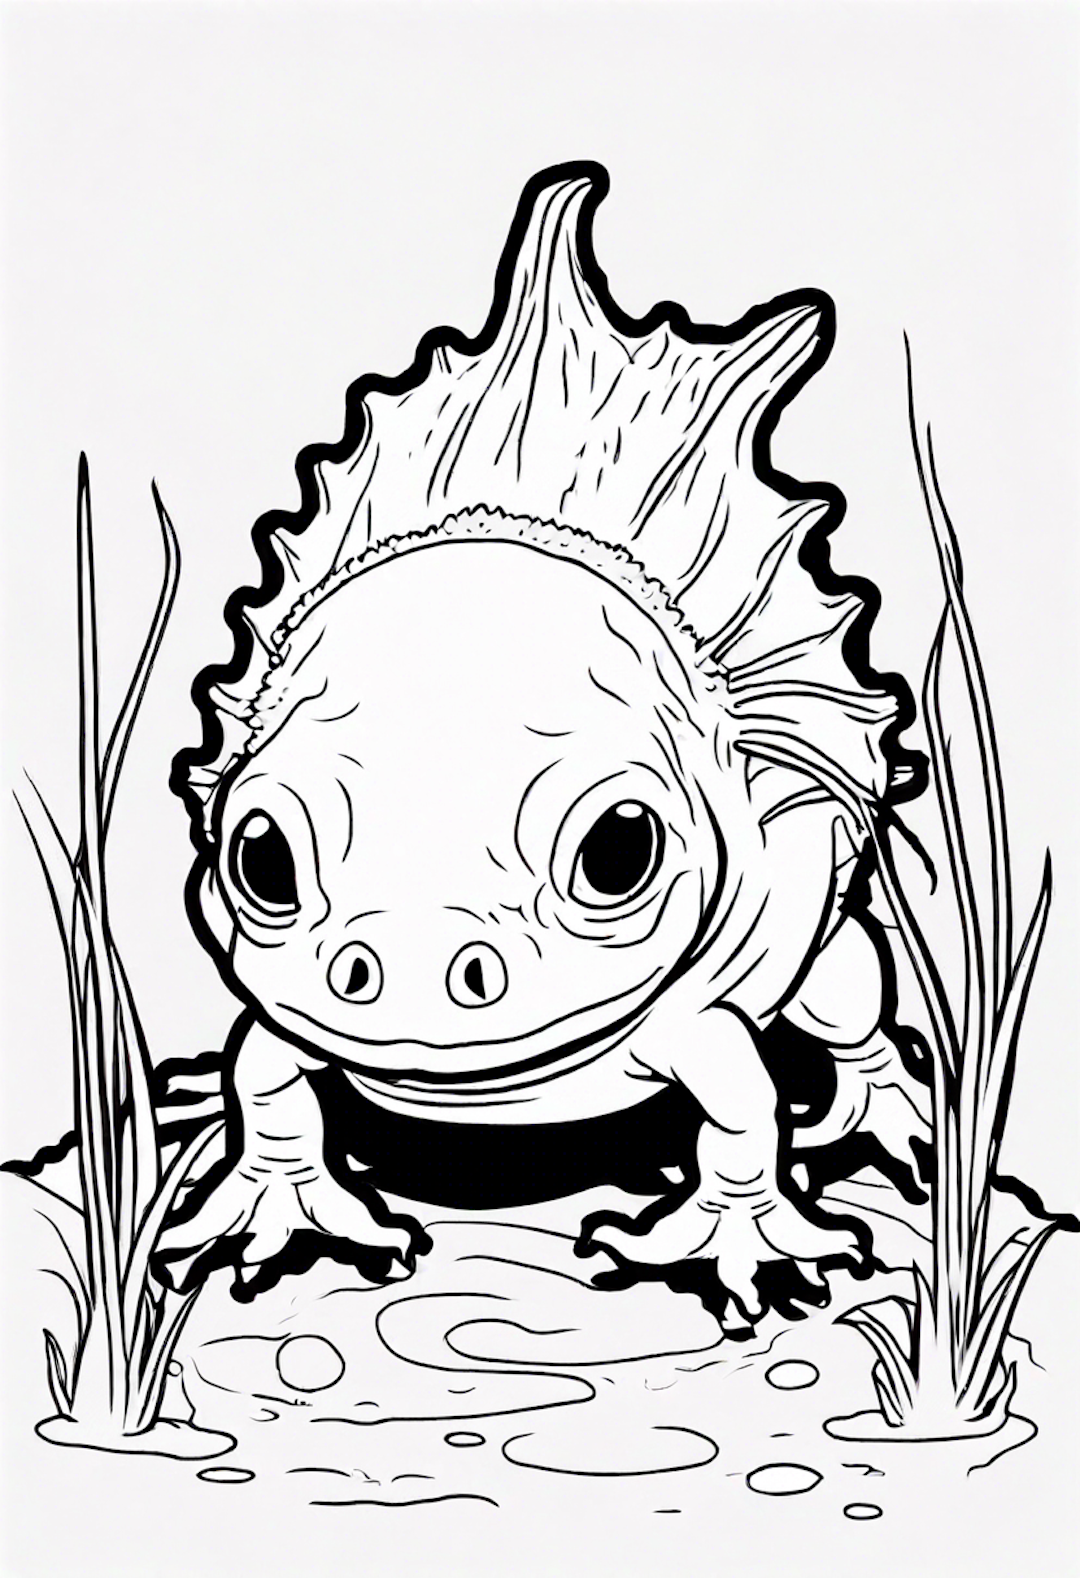 axolotl coloring pages